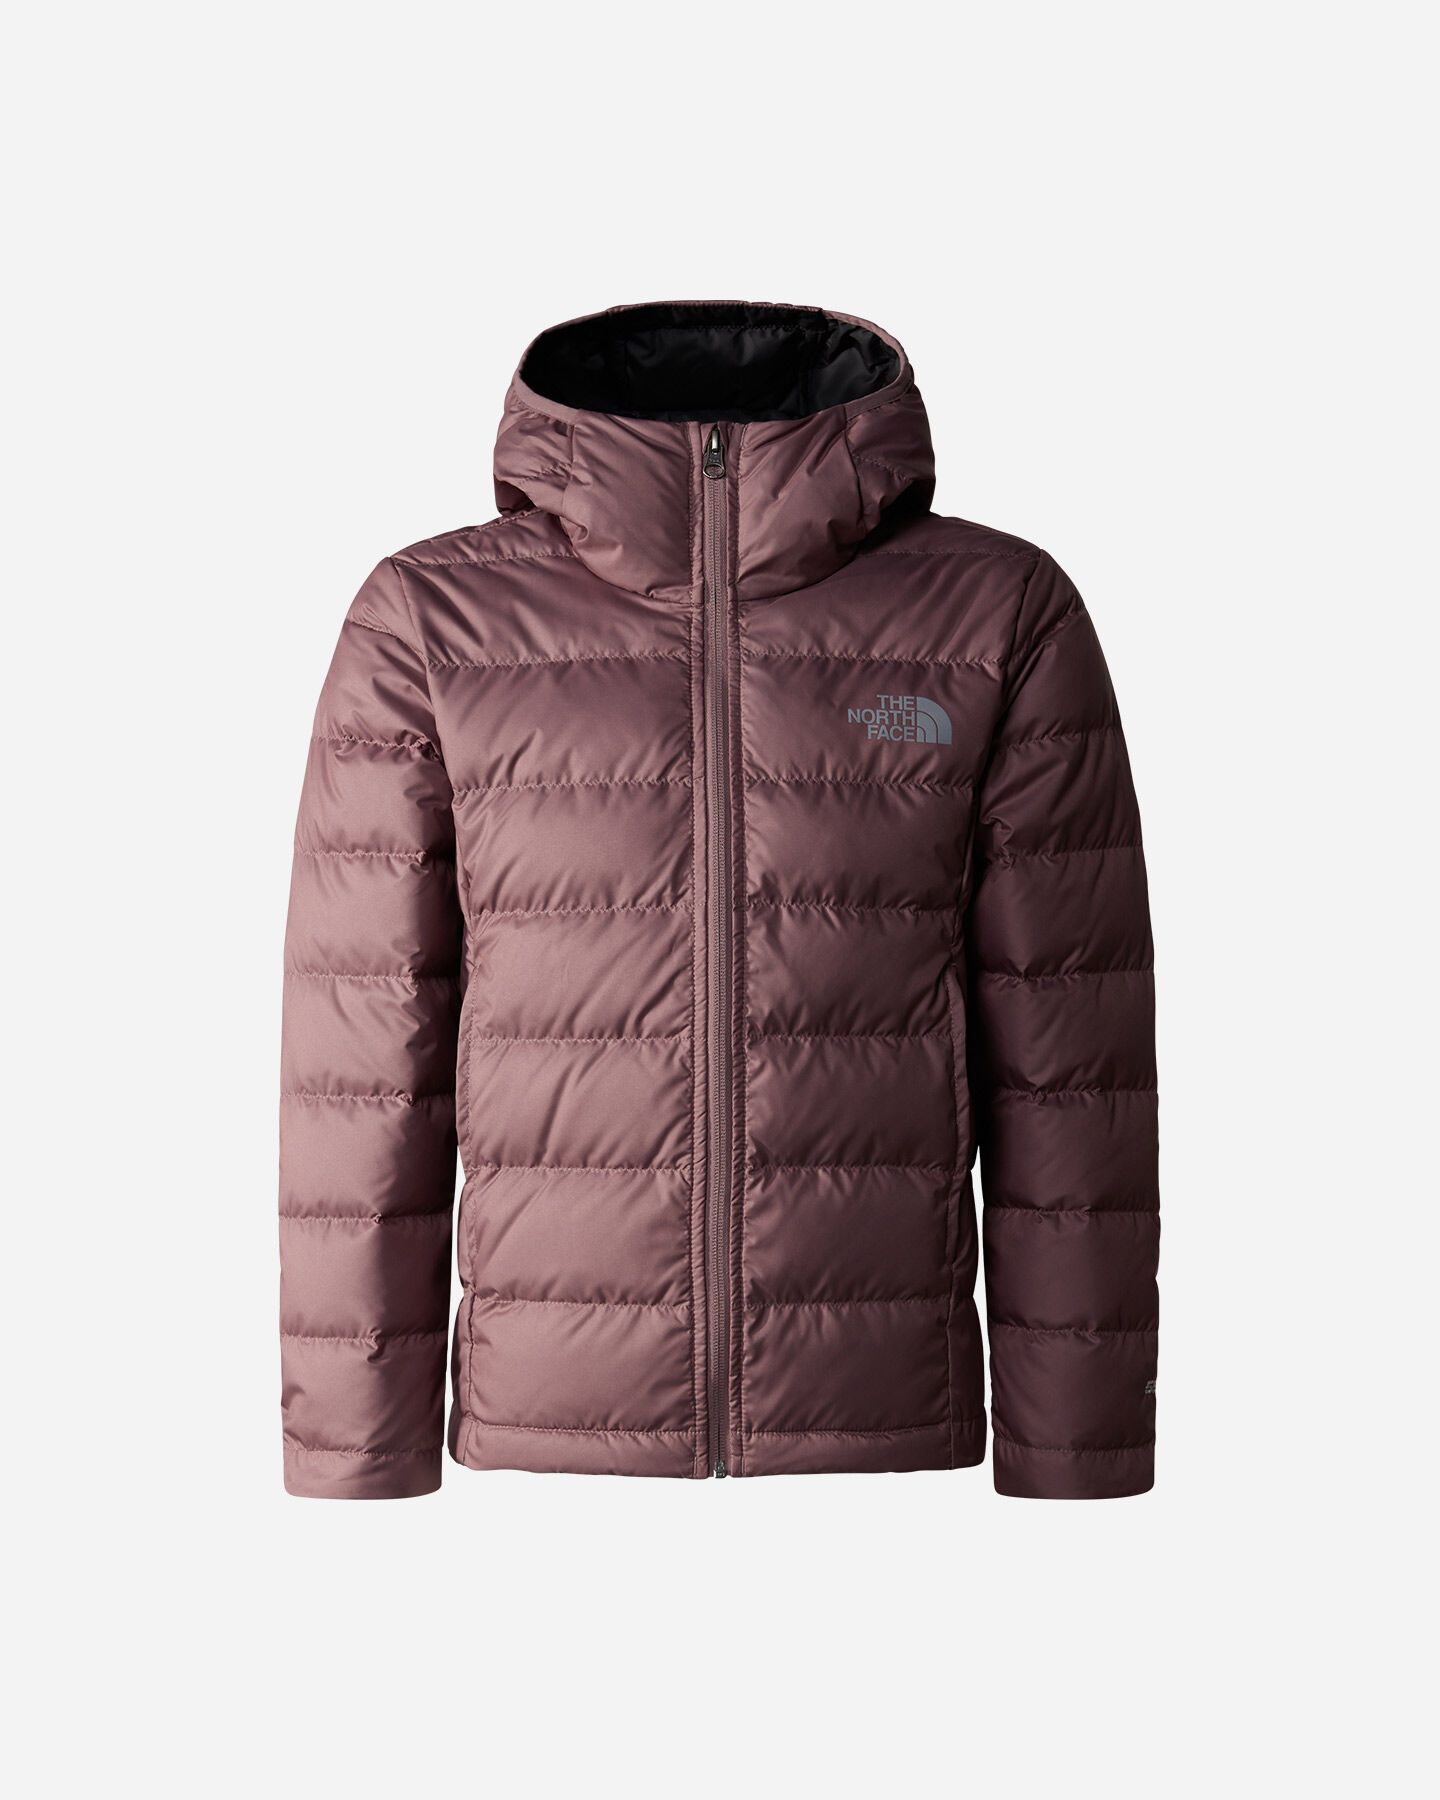  Giubbotto THE NORTH FACE NEVER STOP JR S5599274|I0V|S scatto 0